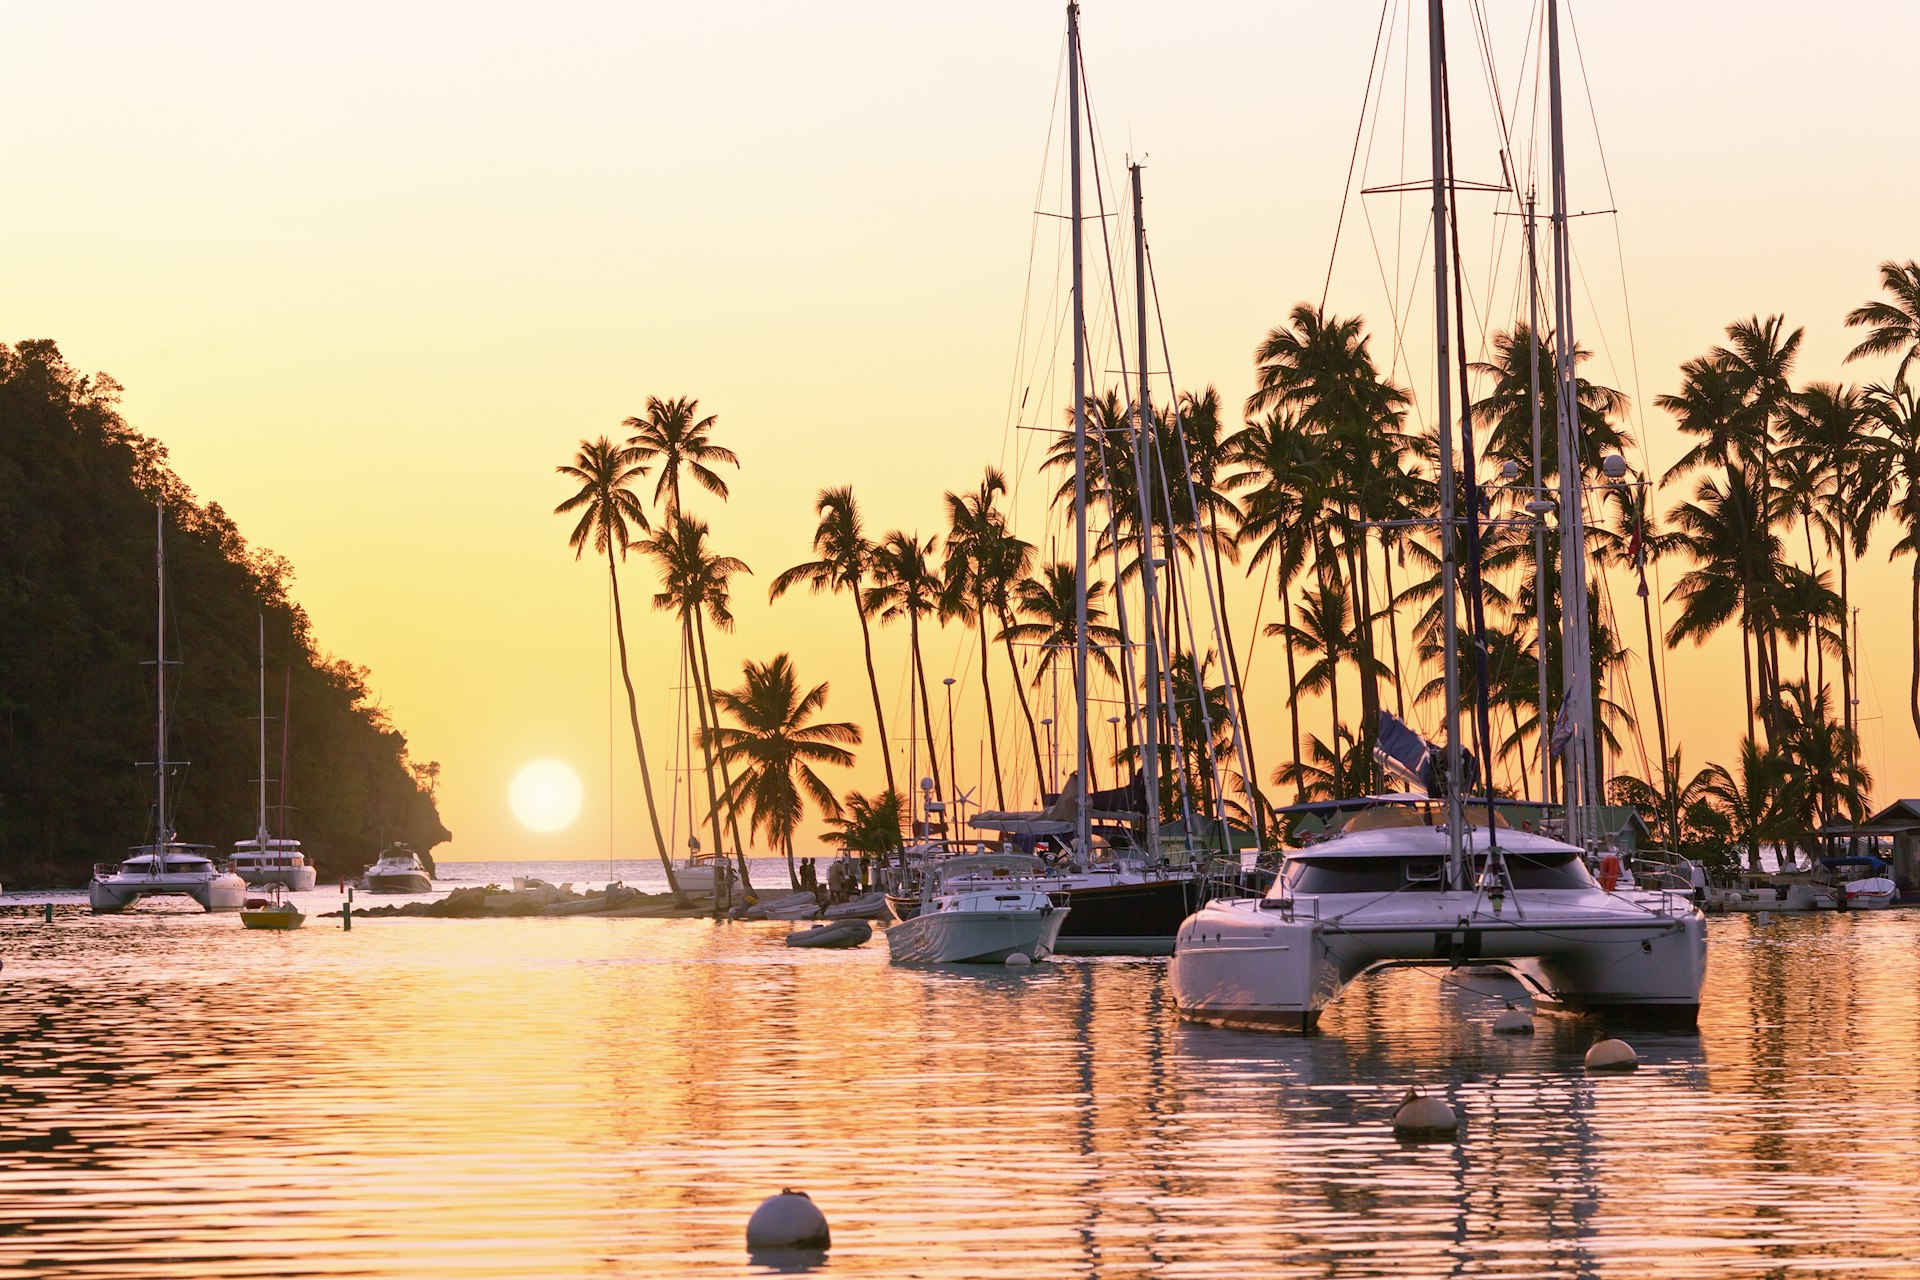 Boats sit in a peacefull bay surrounded by palm trees as the sun sets out over the sea